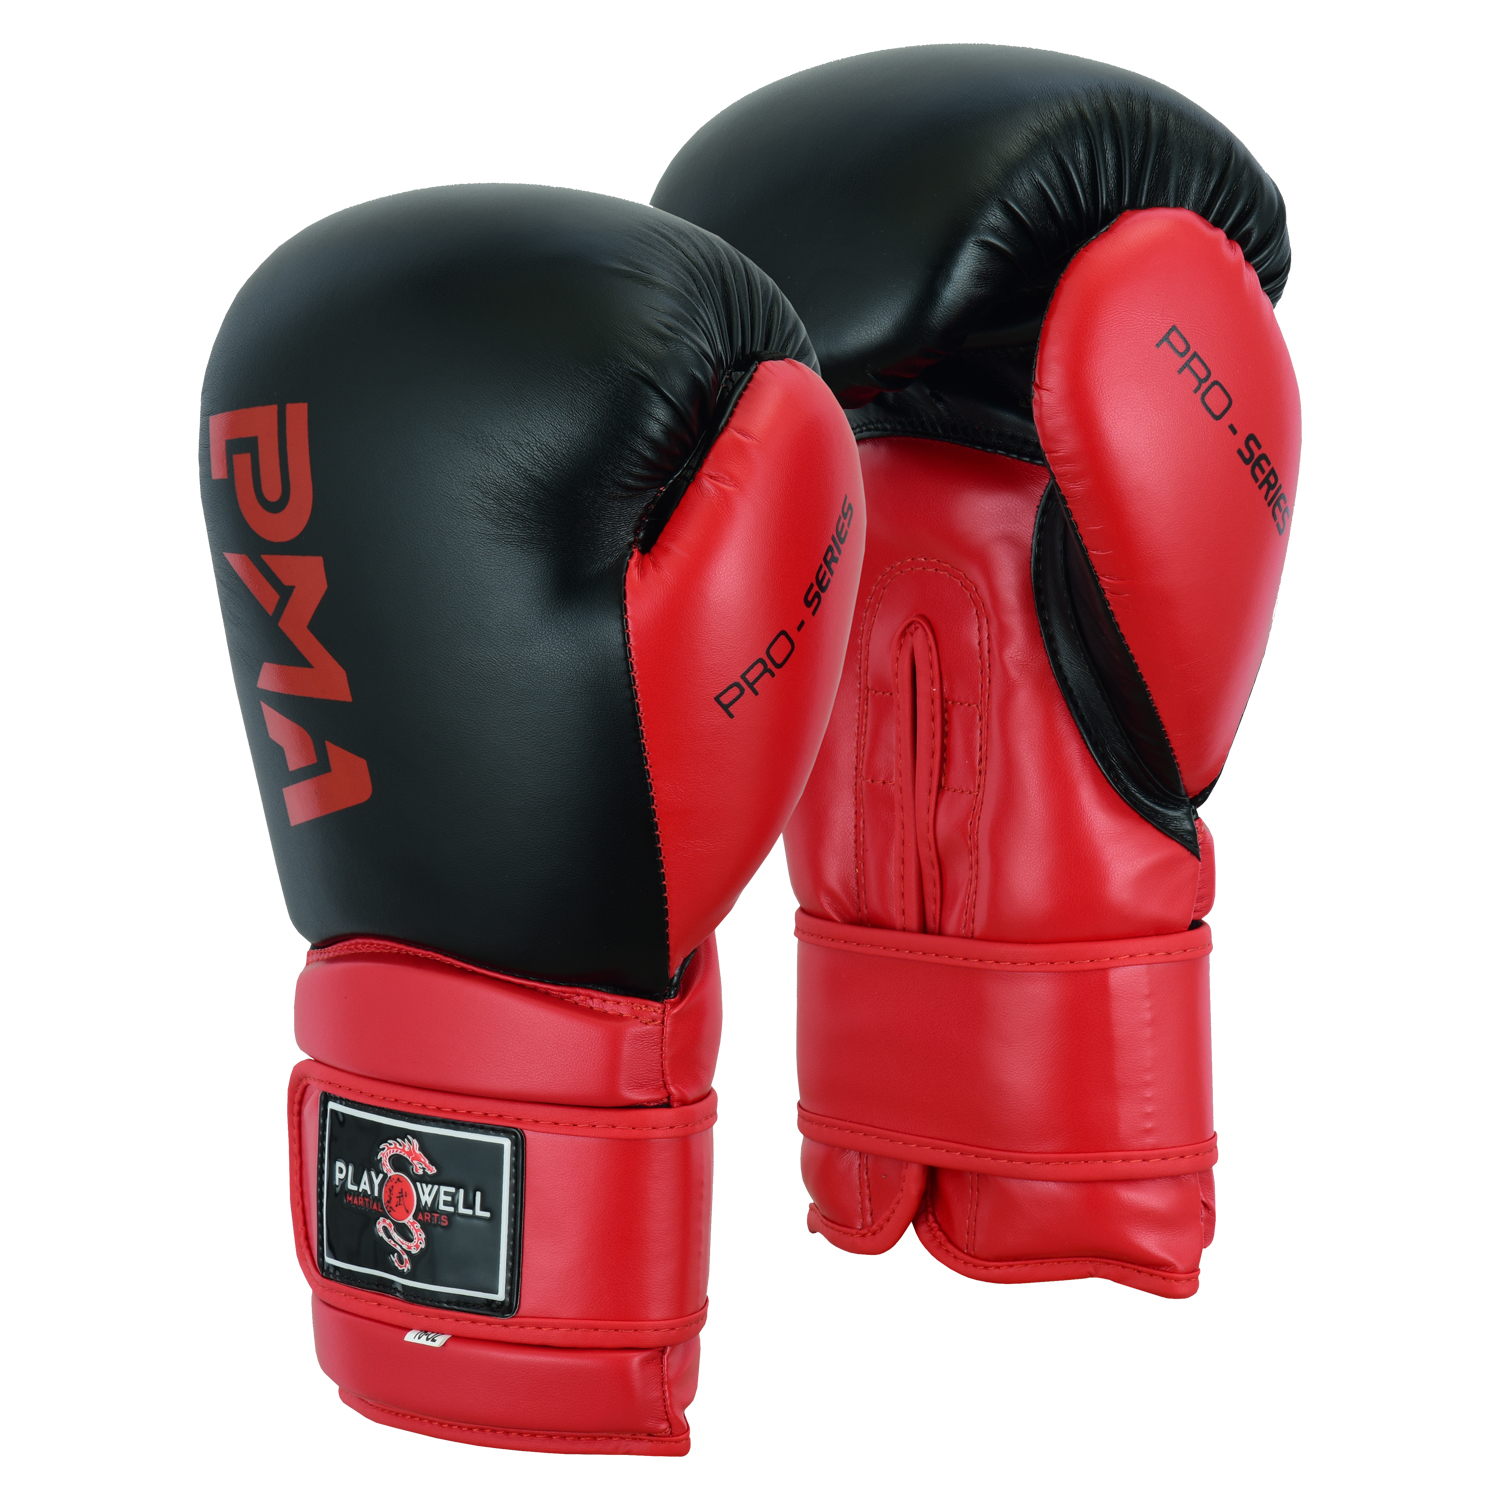 Playwell Pro Series Boxing Gloves - Black/Red - FREE WRAPS - Click Image to Close